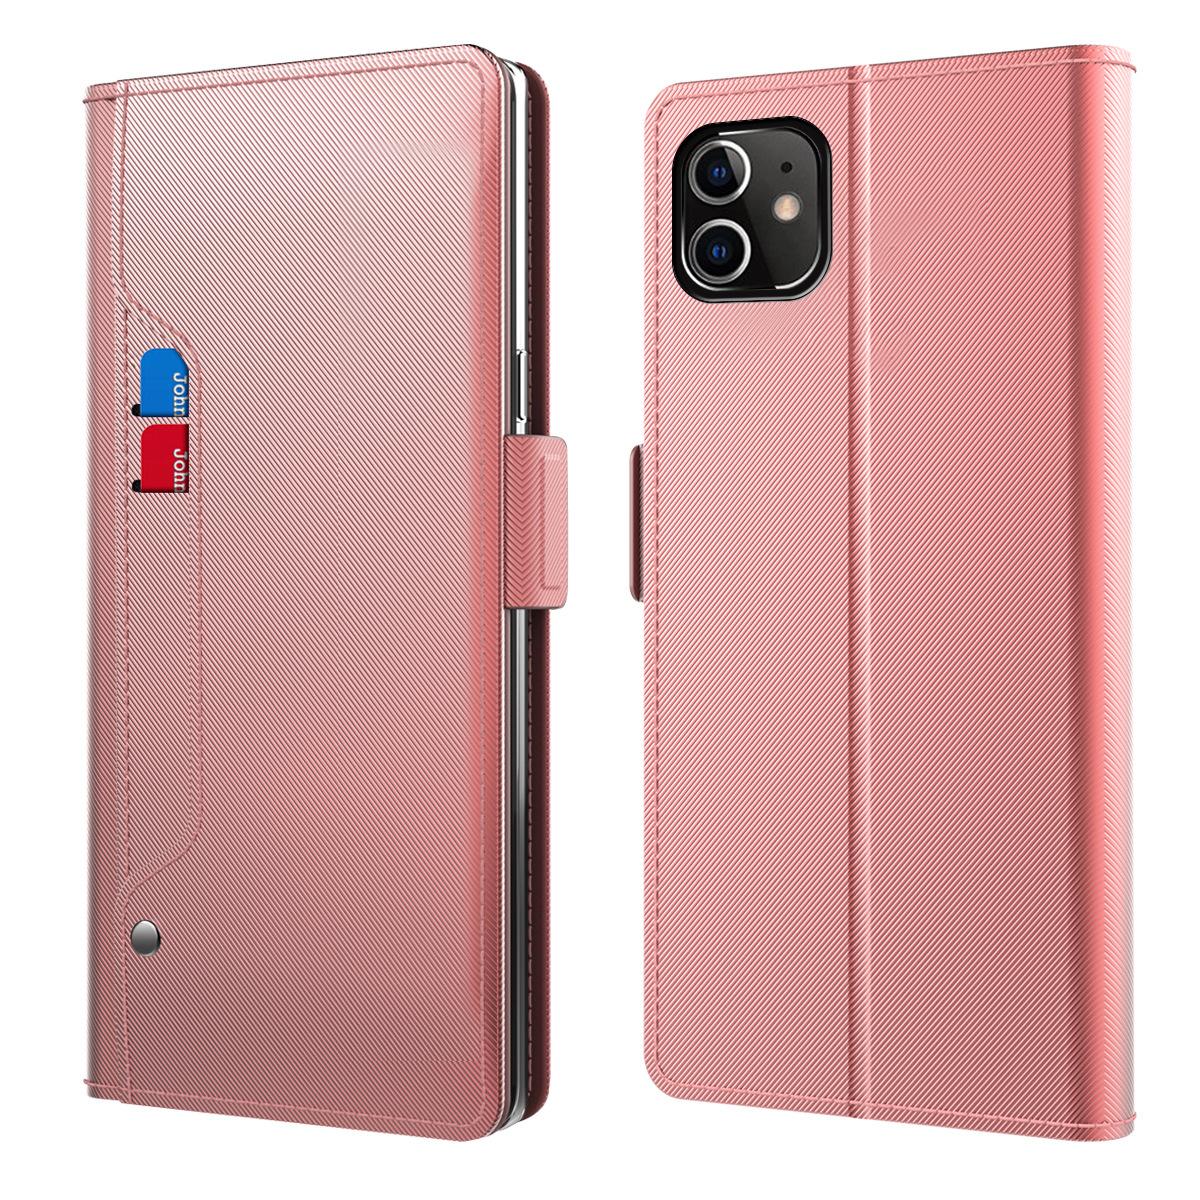 iPhone 12/12 Pro Wallet Case Mirror Pink Gold